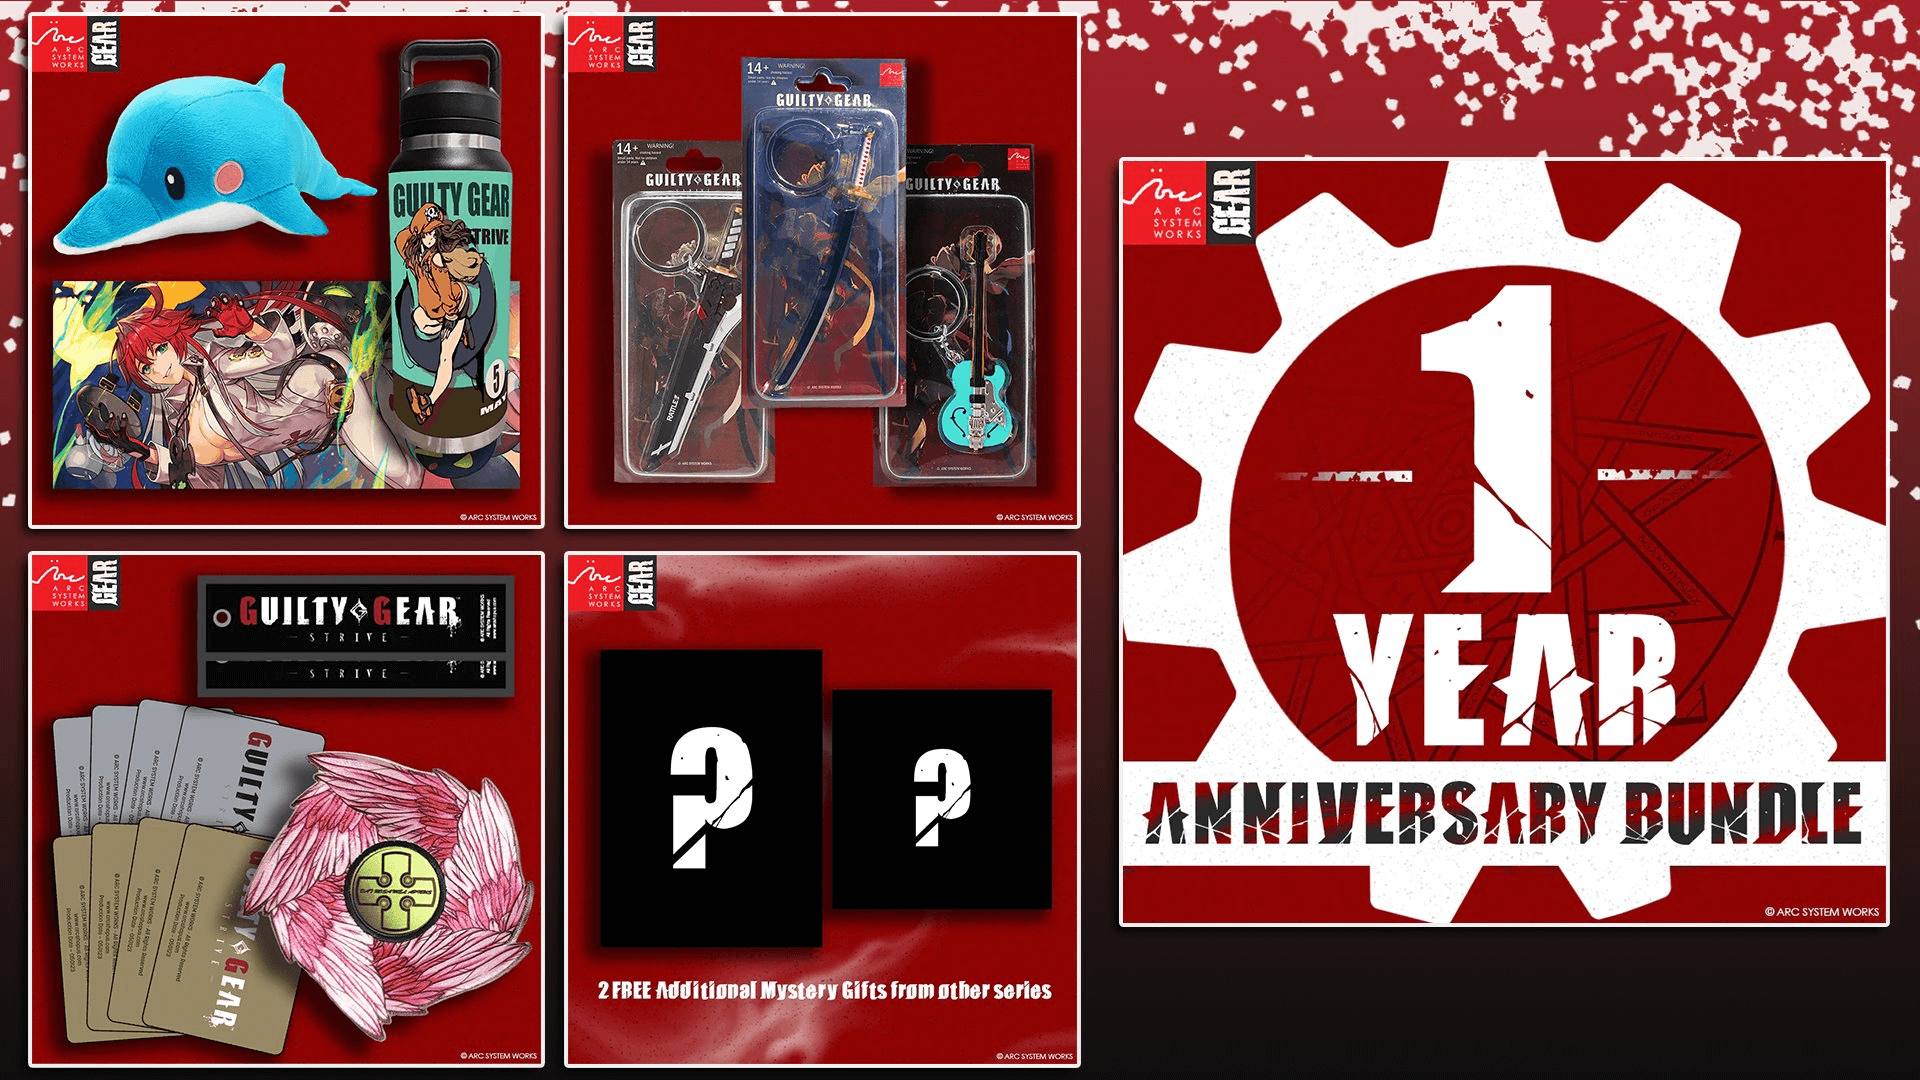 The Arc Shop is Celebrating its One Year Anniversary With a Bundle